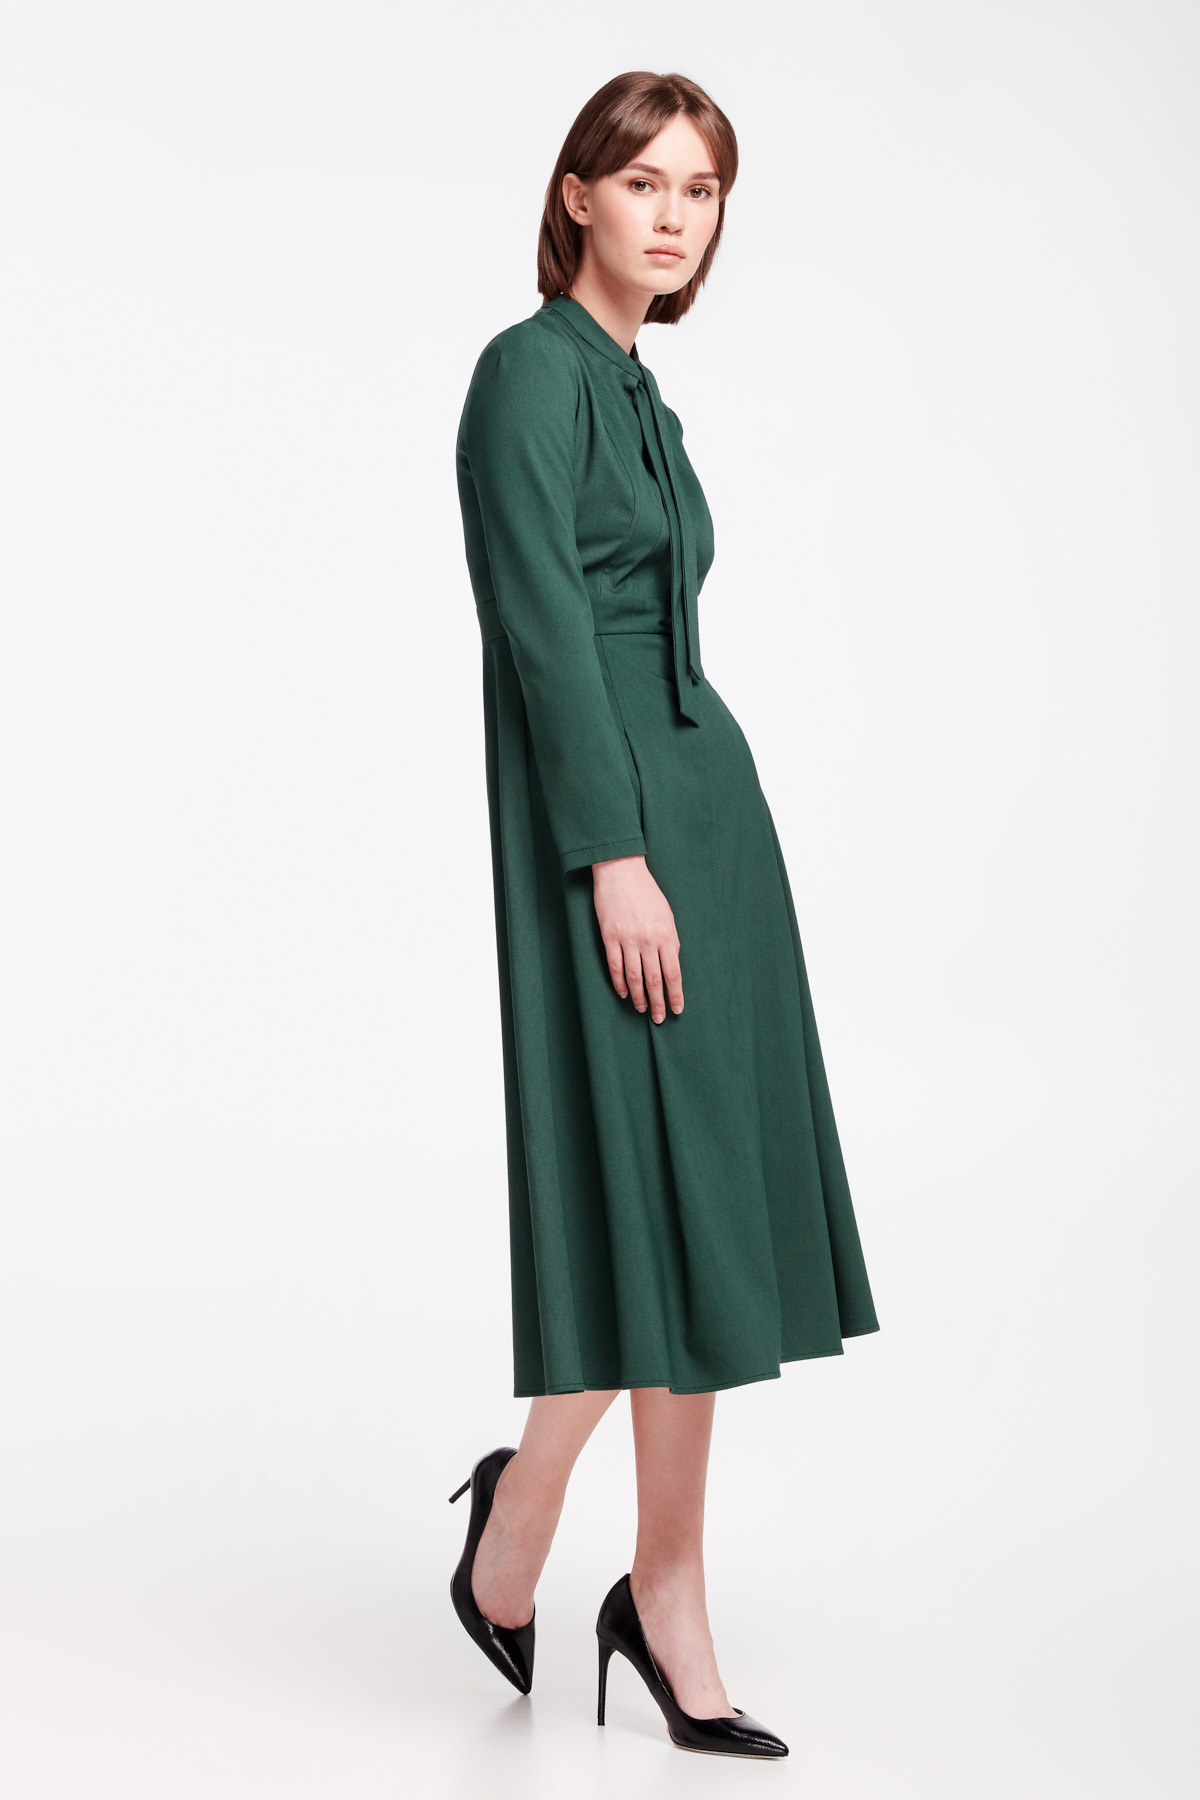 Green dress with a bow, photo 7